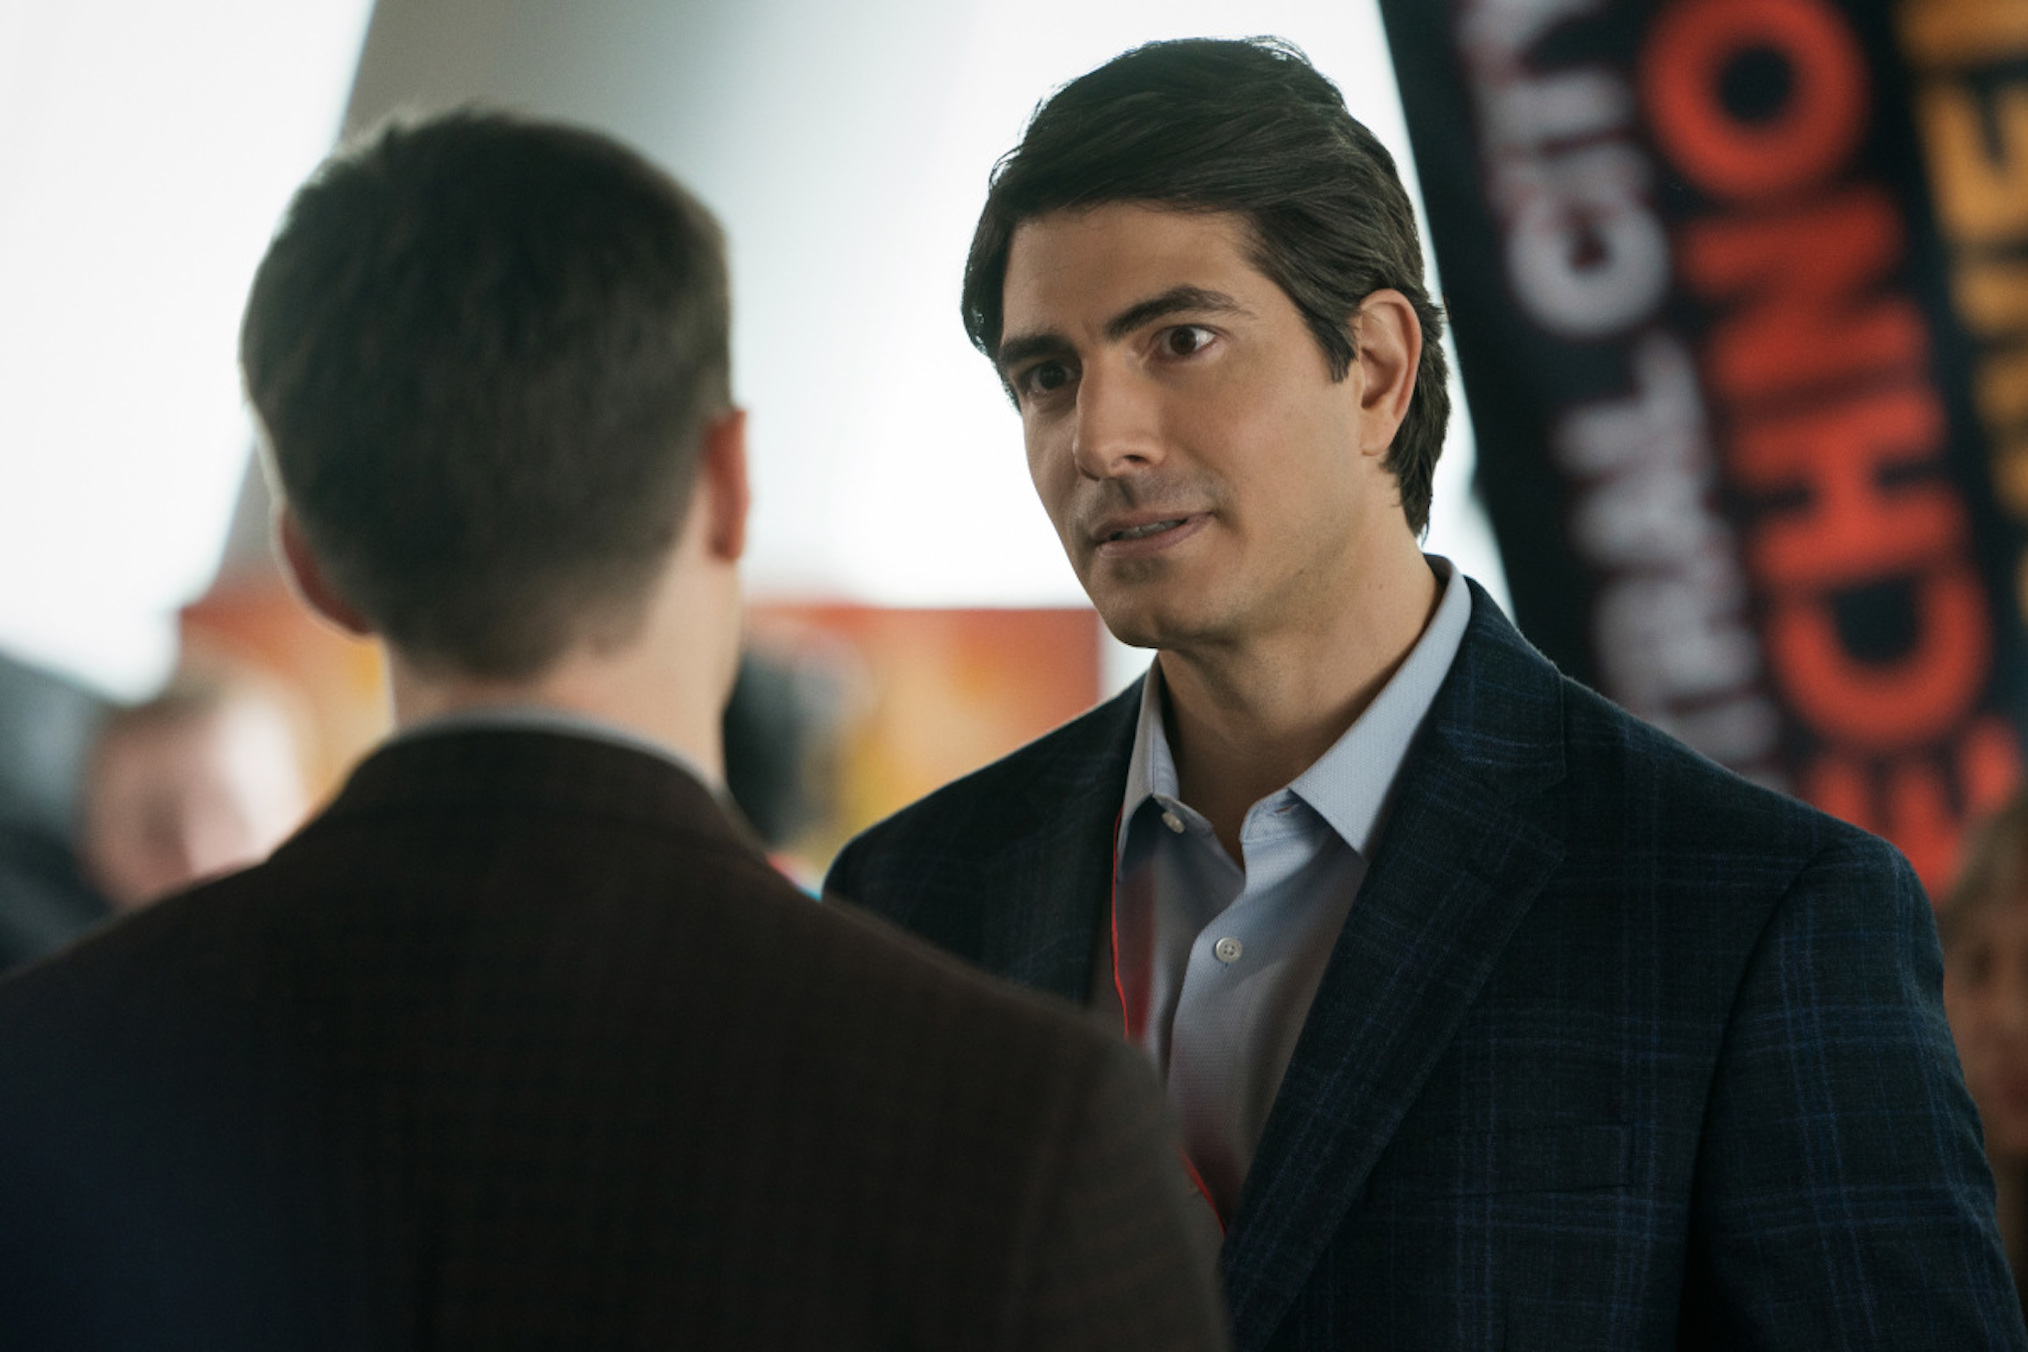 Brandon Routh as Ray Palmer in The Flash.